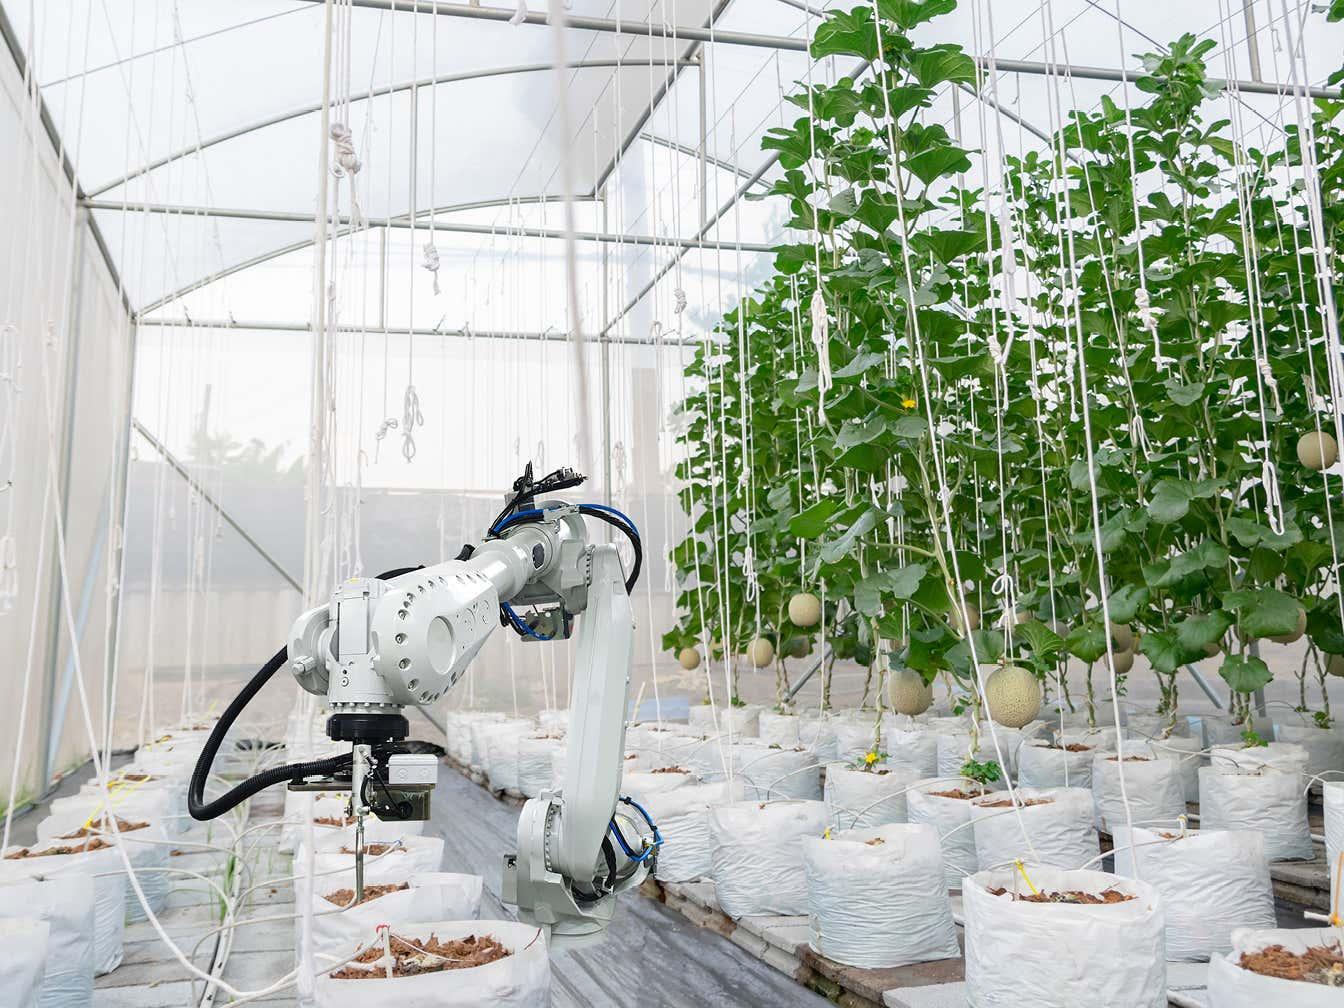 Top Three IP Issues for AgTech Startups